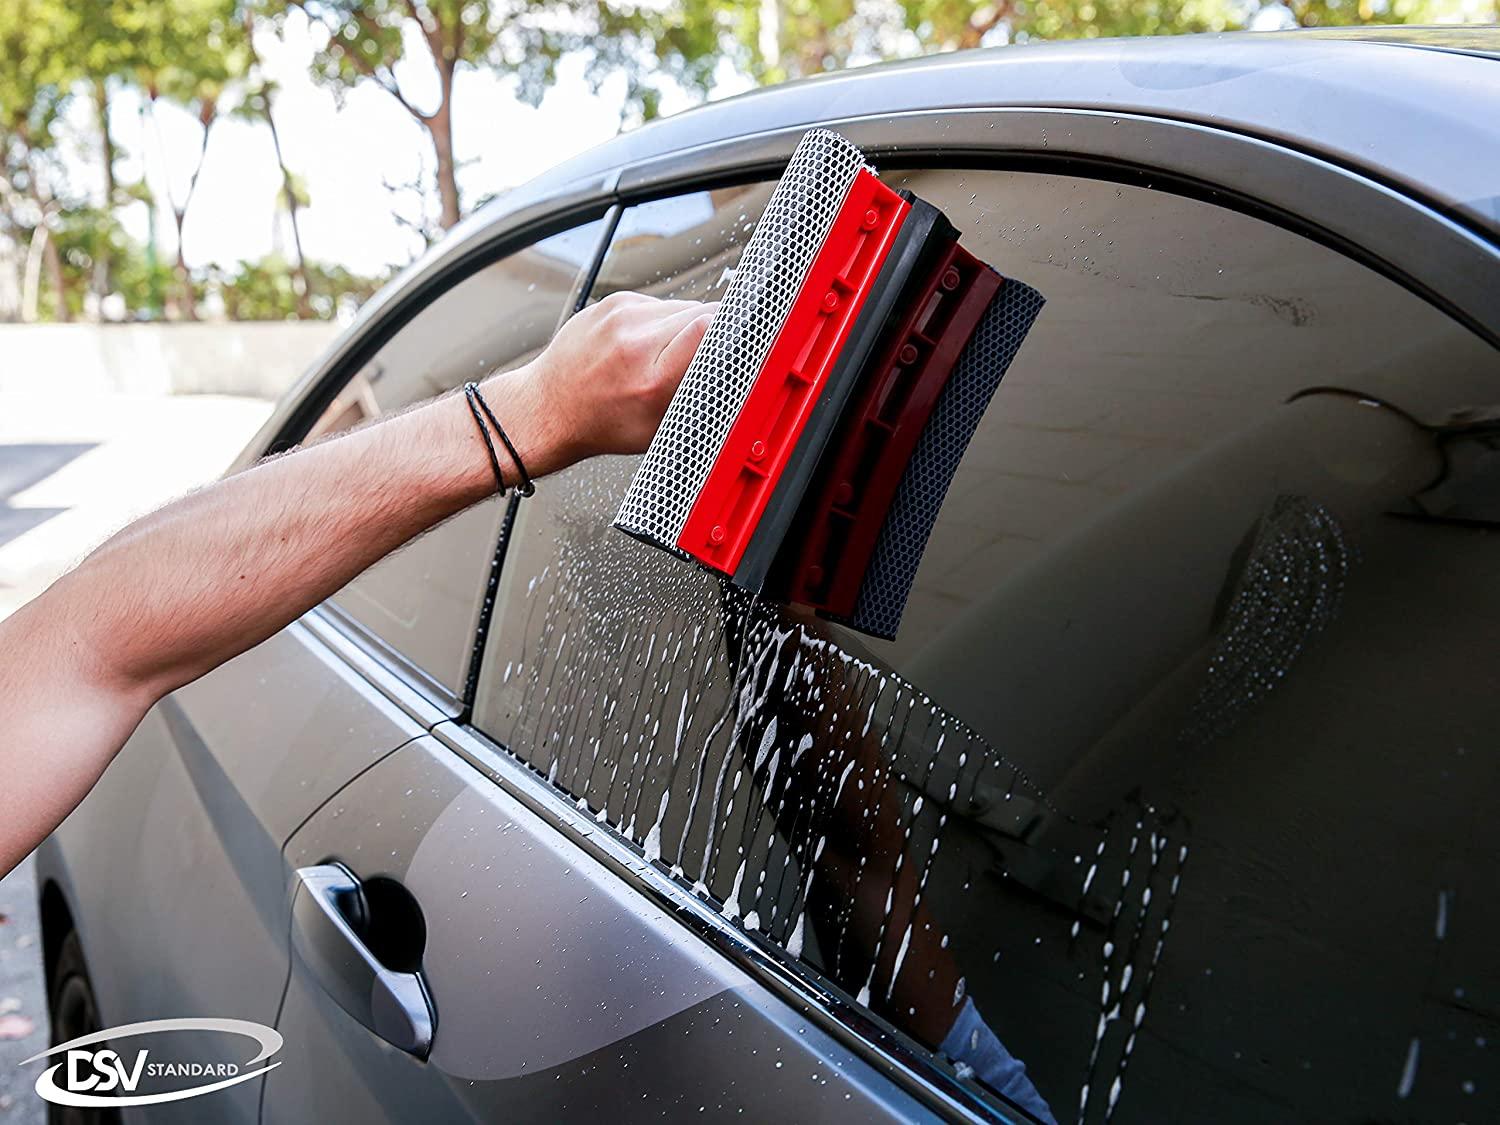 DSV Standard Professional All-Purpose Window Squeegee for Car